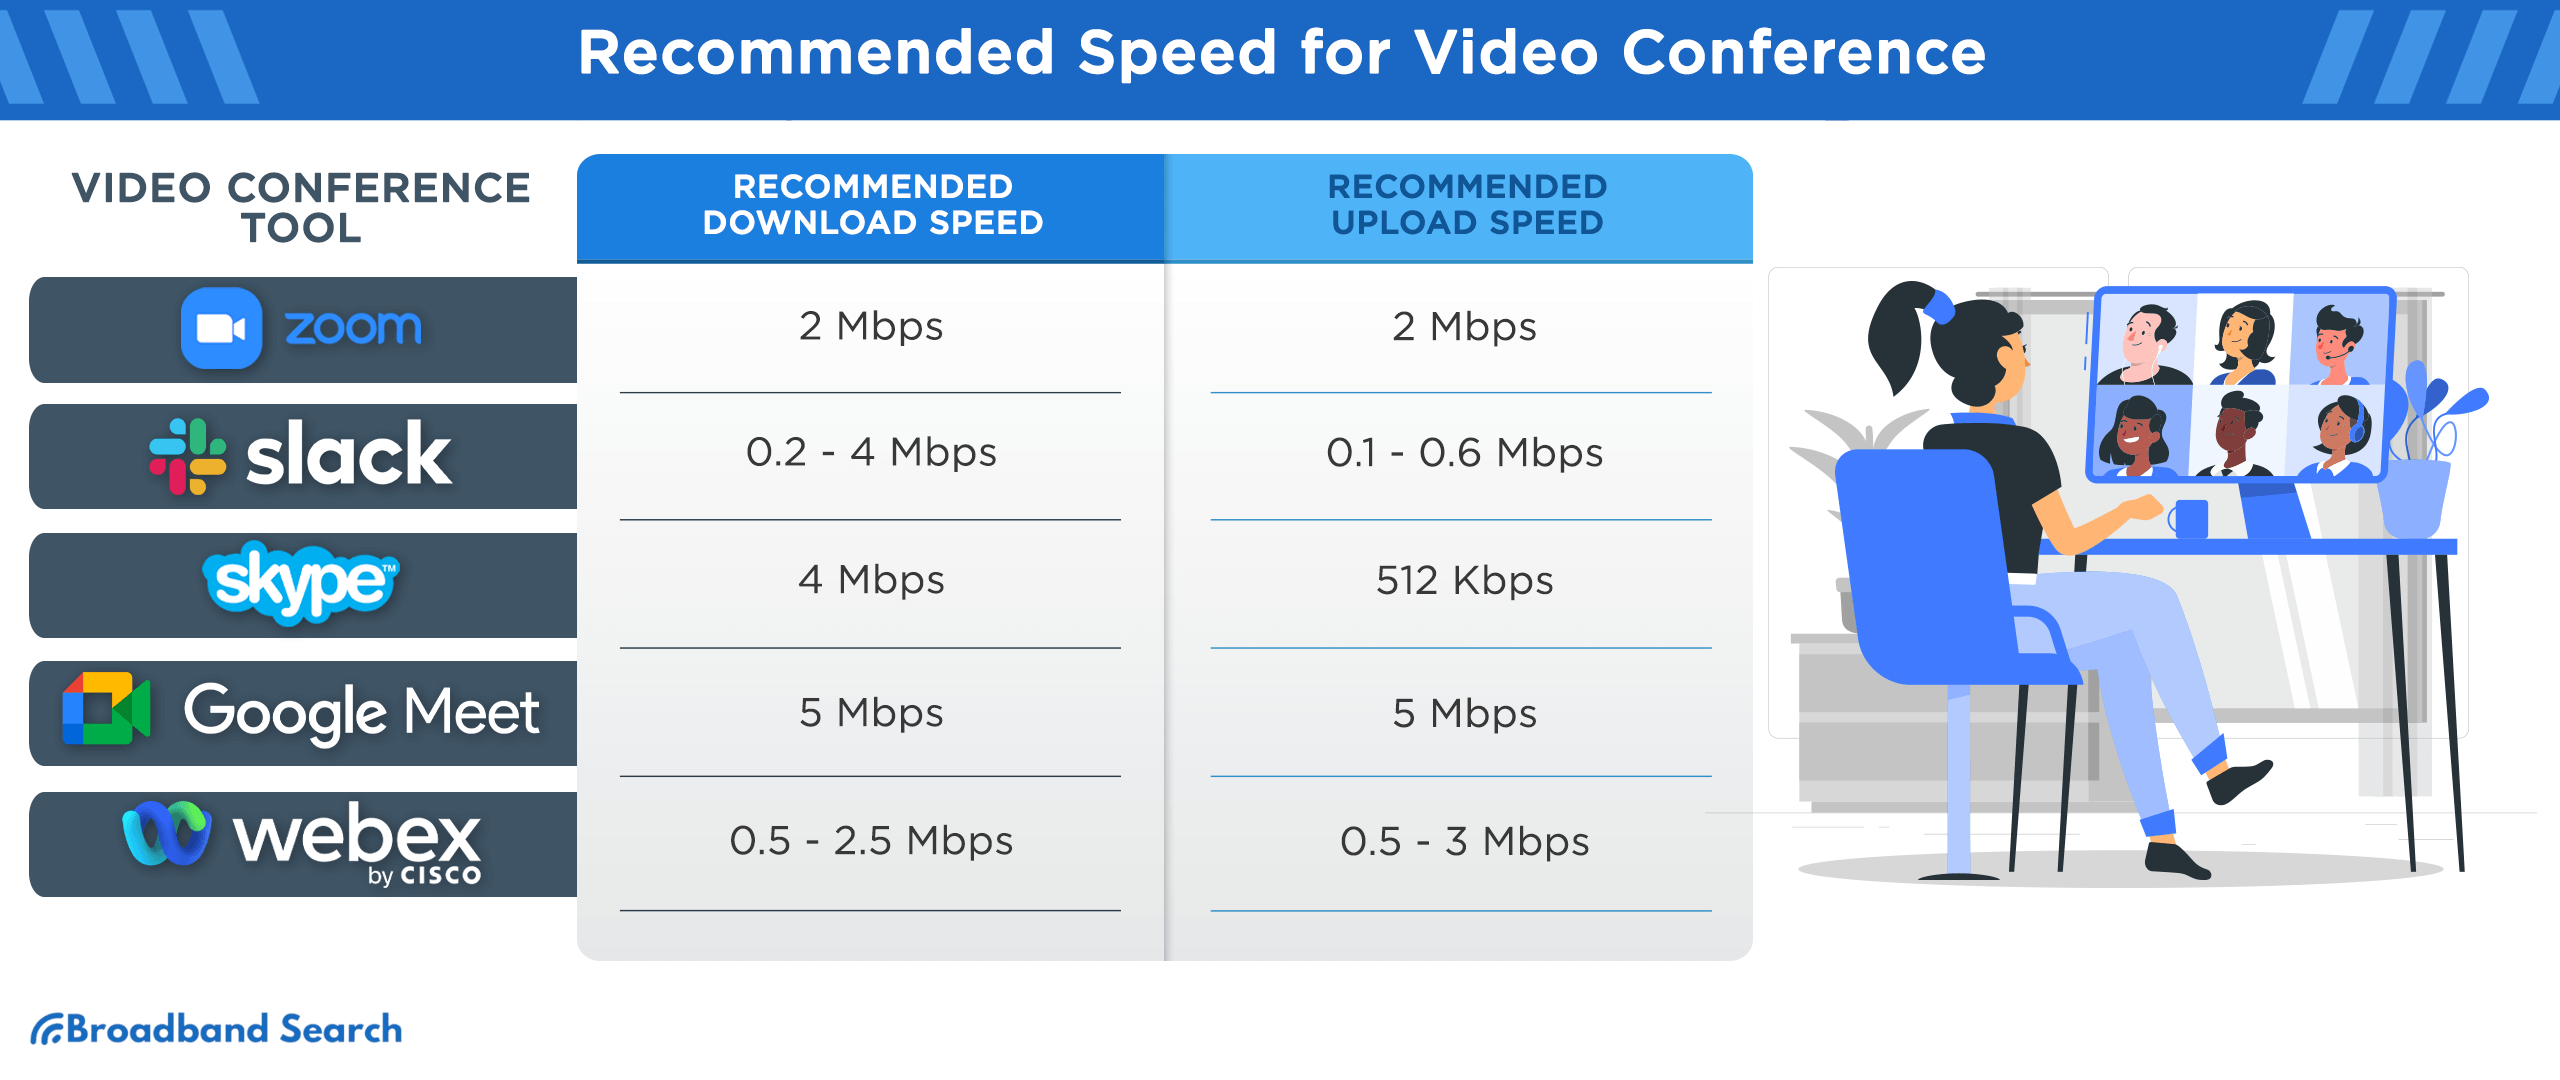 Recommended Speed for Video Conference